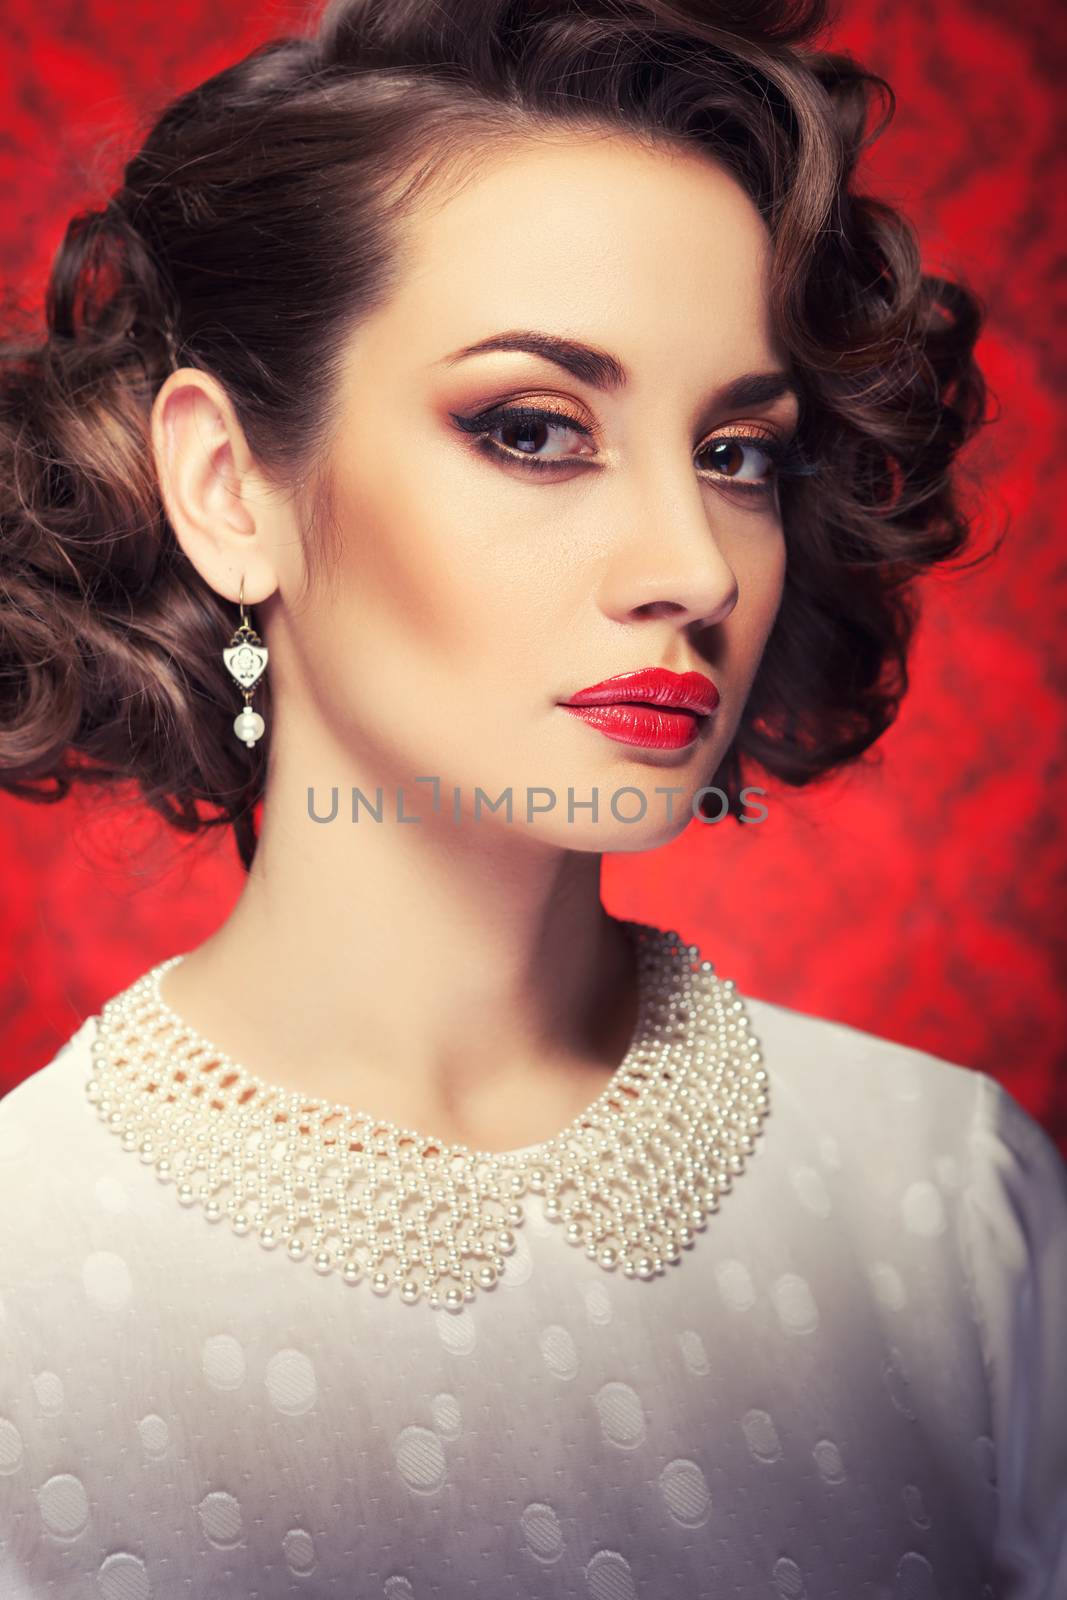 Beautiful woman toned image on vintage red background. Professional make up and hairstyle. Old-fashioned girl